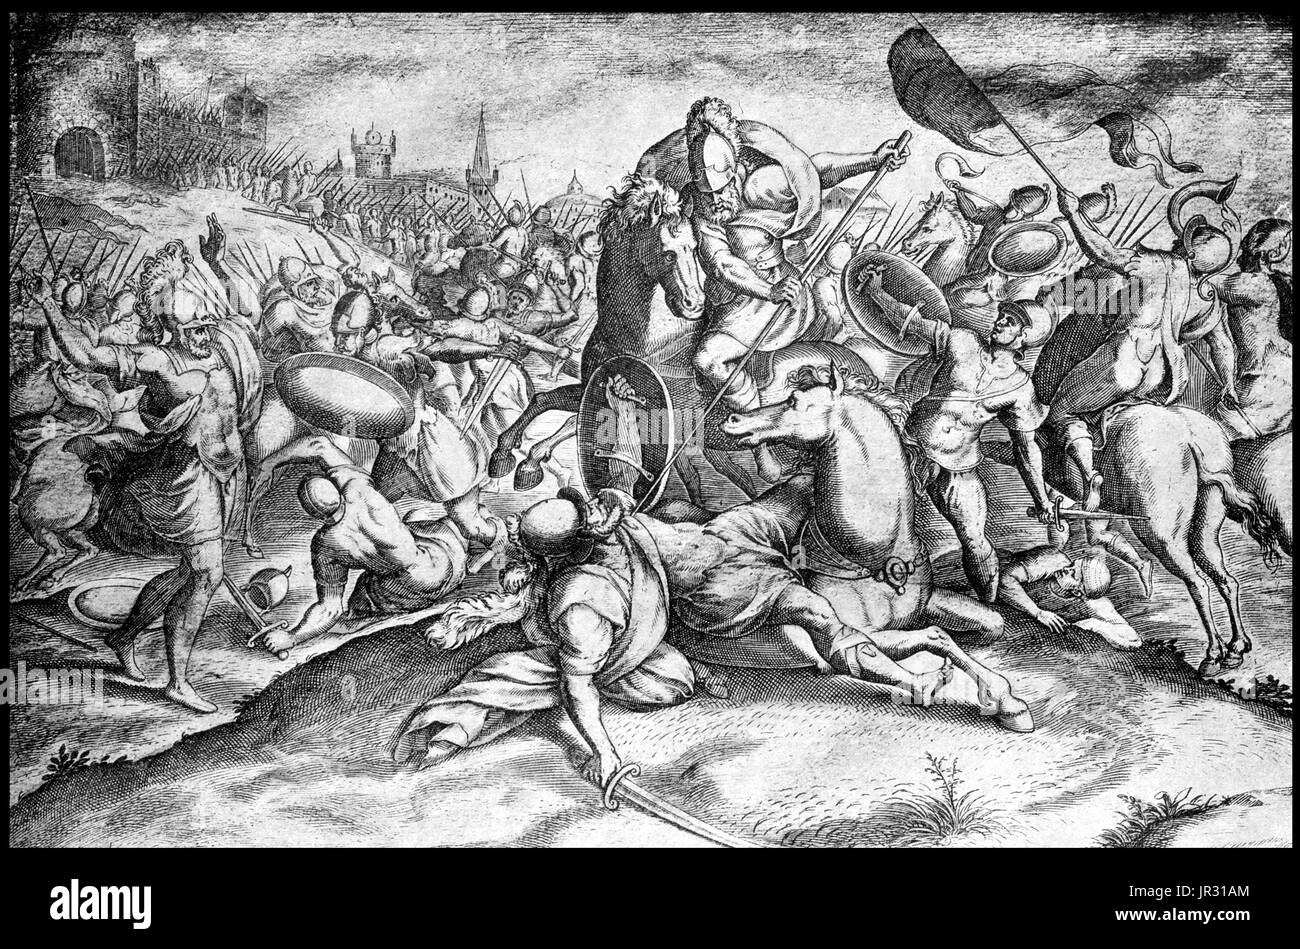 Battle of Dijon. A coalition of Franks and Burgundians crush the forces under Gundobad. King Clovis I pursues him to Avignon, where he surrenders and promises to pay a yearly tribute. Clovis (466 - November 27, 511) was the first king of the Franks to unite all of the Frankish tribes under one ruler, changing the form of leadership from a group of royal chieftains to rule by a single king and ensuring that the kingship was passed down to his heirs. He is considered to have been the founder of the Merovingian dynasty, which ruled the Frankish kingdom for the next two centuries. Stock Photo